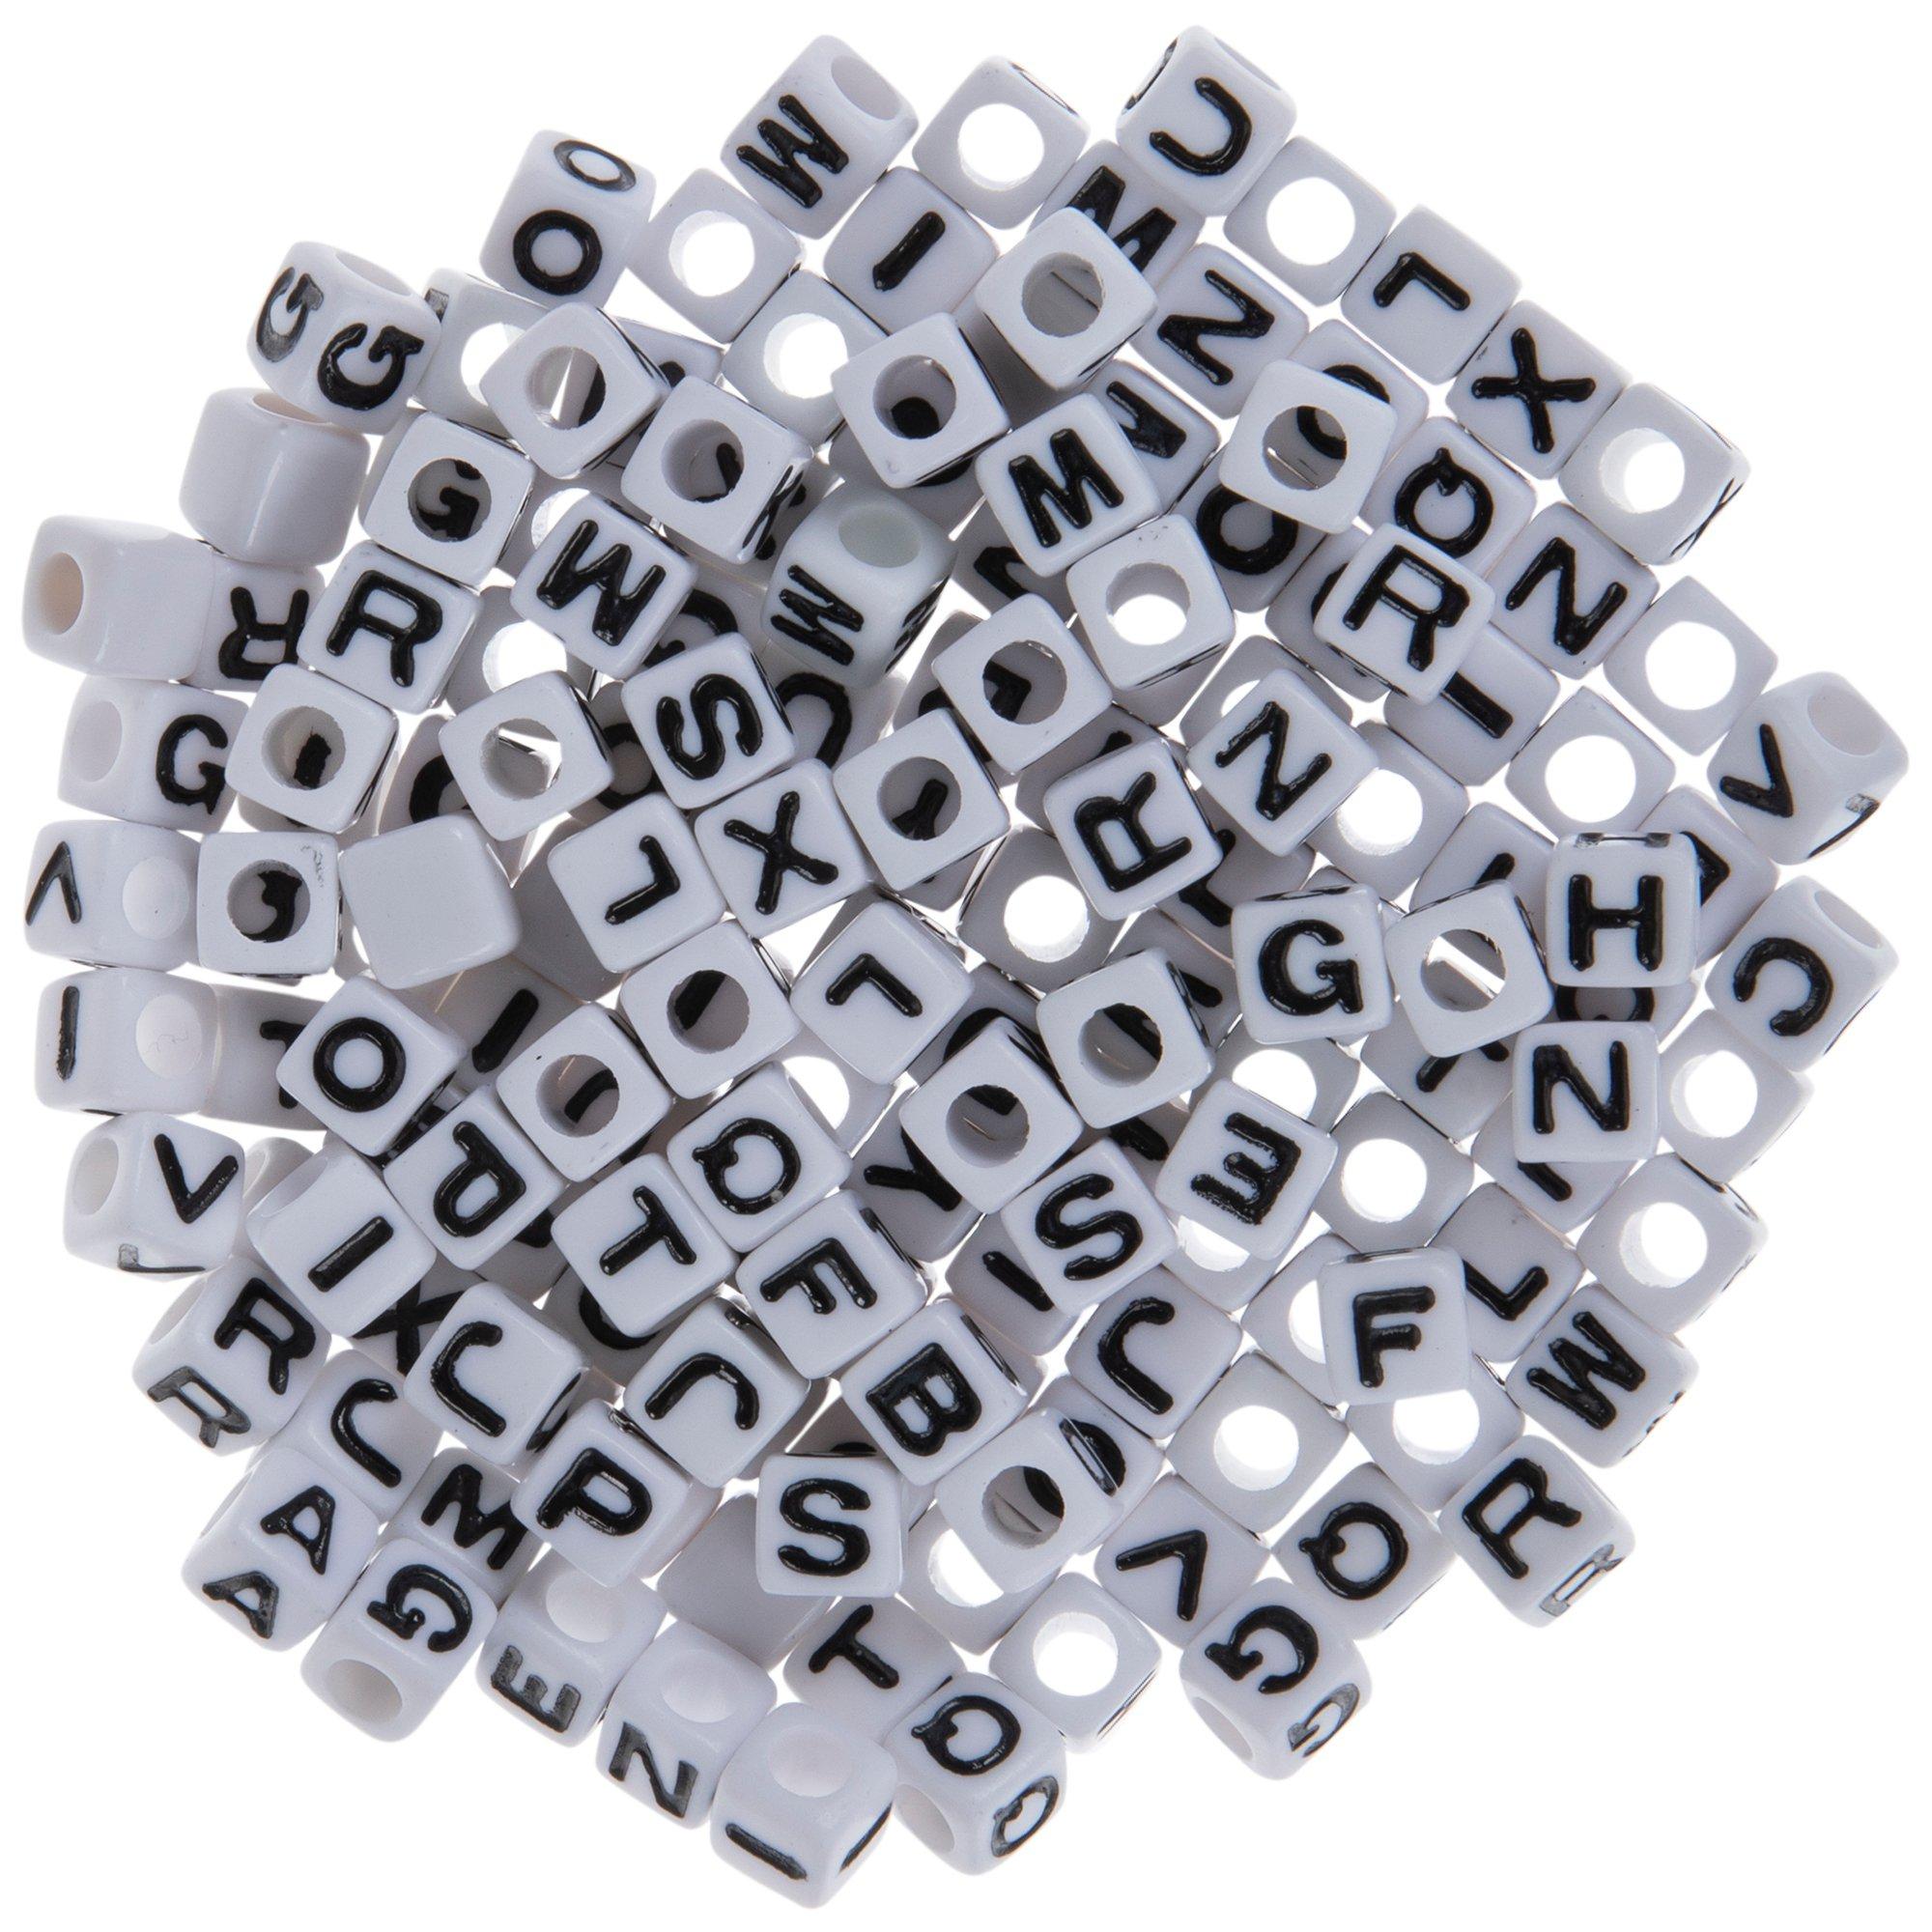 Colorations Big Letter Beads - 300 Pieces